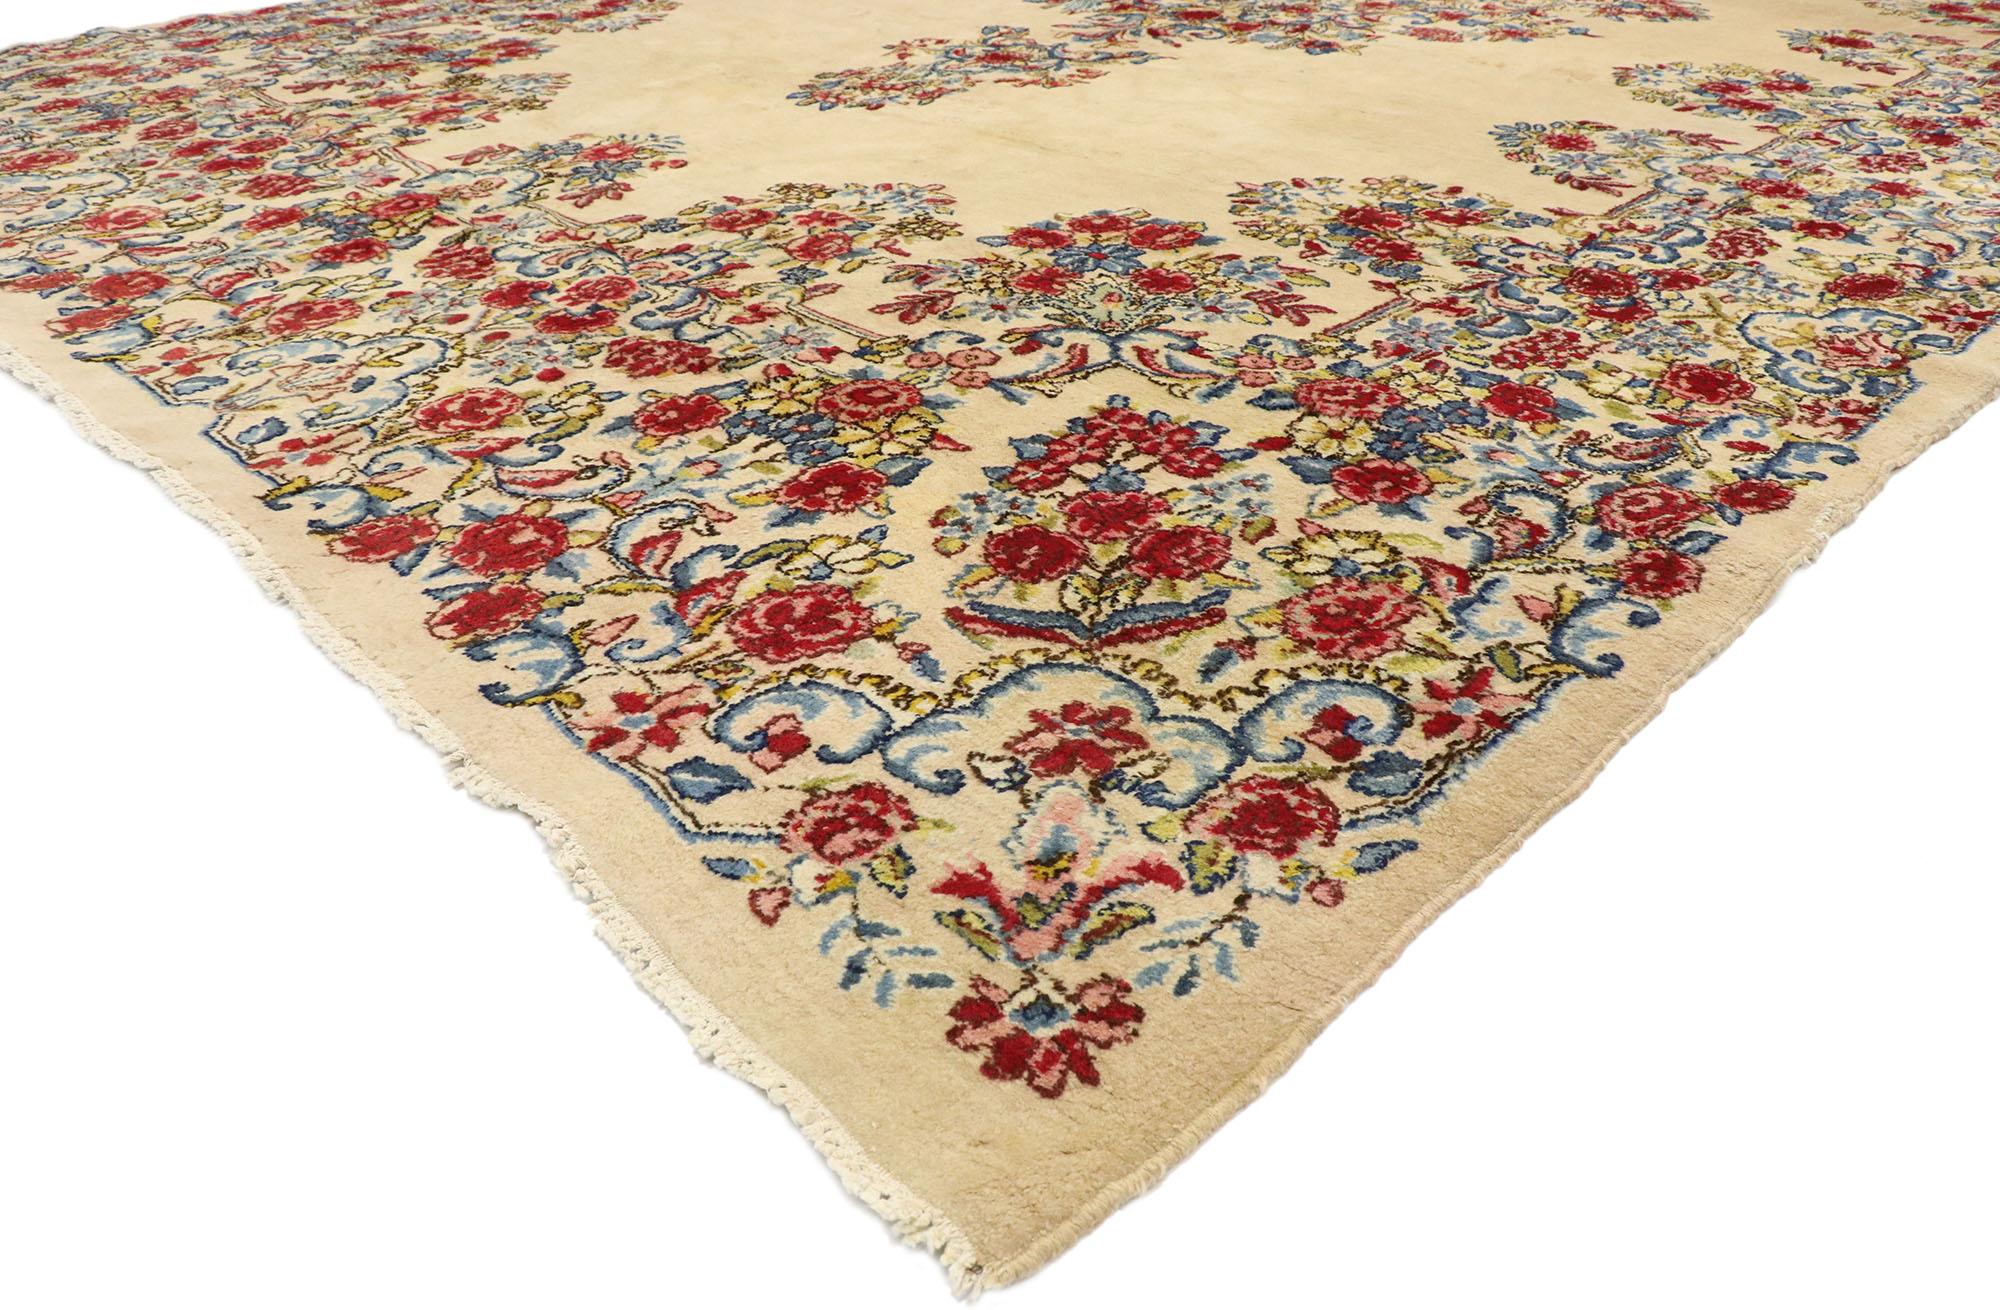 74919 vintage Kirman Palace size rug with Romantic French Provincial style. This hand knotted wool vintage Persian palace rug features a Classic Kerman Medallion design composed of delicate flowers in an open field. The elaborate Kerman medallion is